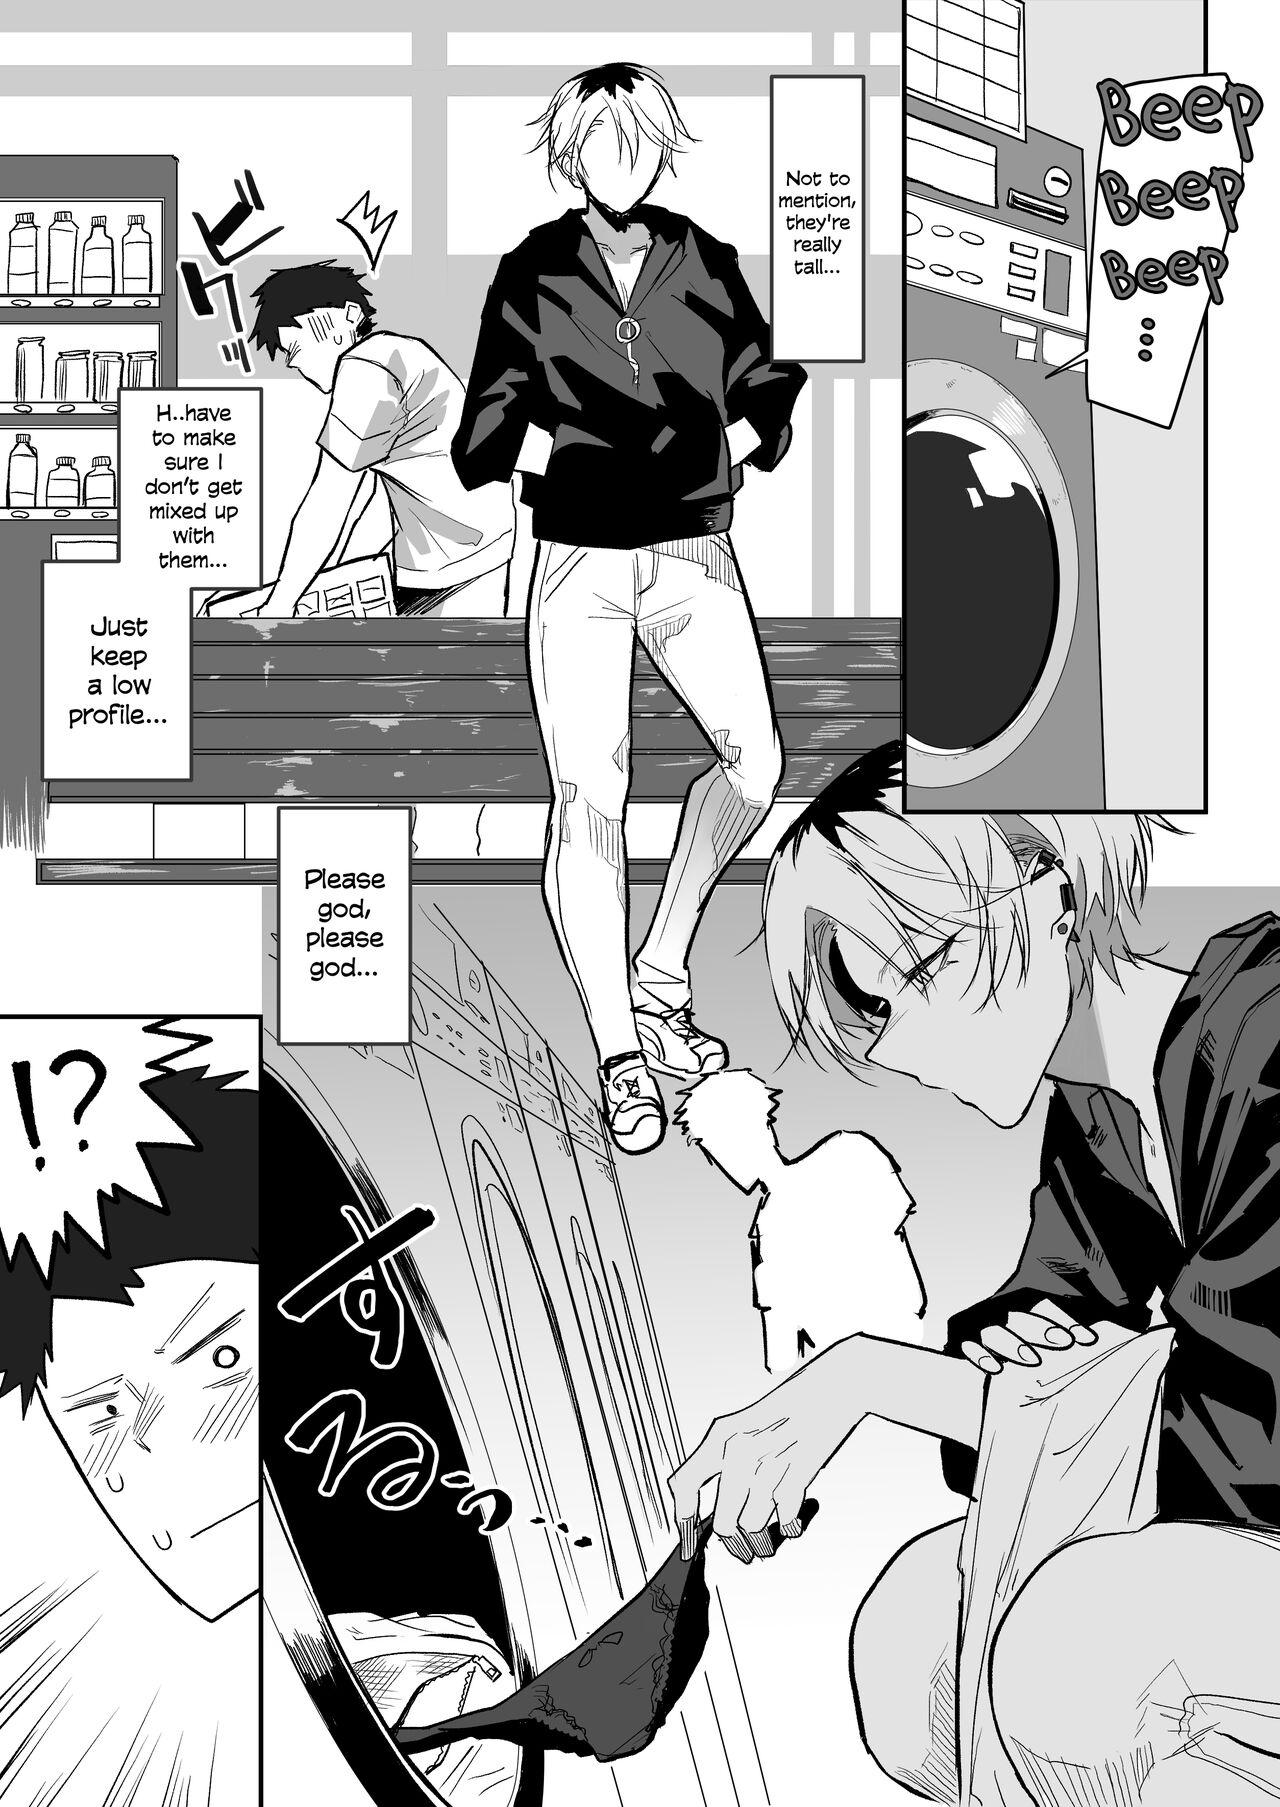 Porno Amateur Coin Laundry de Kowai Yankee ni Karamareru Manga | A Manga About Getting Mixed Up With A Scary Delinquent At The Laundromat - Original Juggs - Page 2